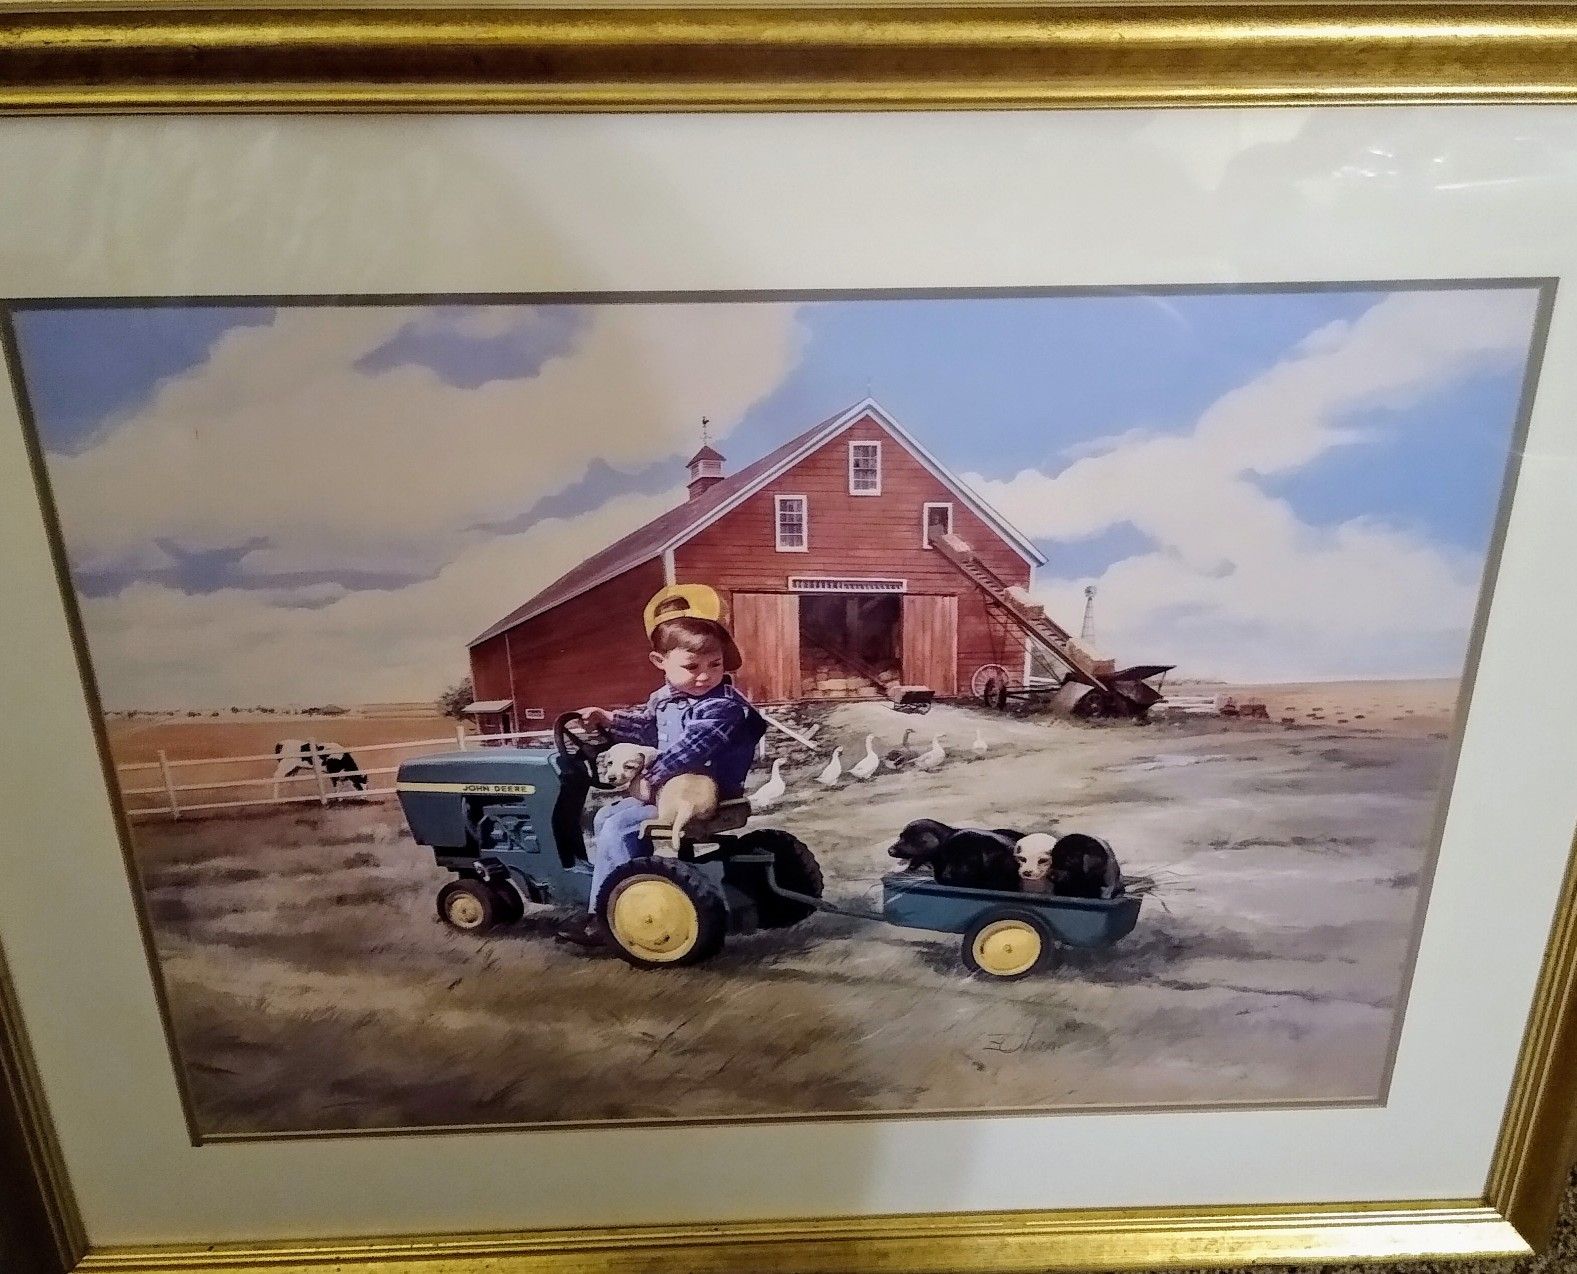 JOHN DEERE TRACTOR RIDE!! Don zolan painting 3 out of $999 tractor ride John Deere little boy and dogs farm scene